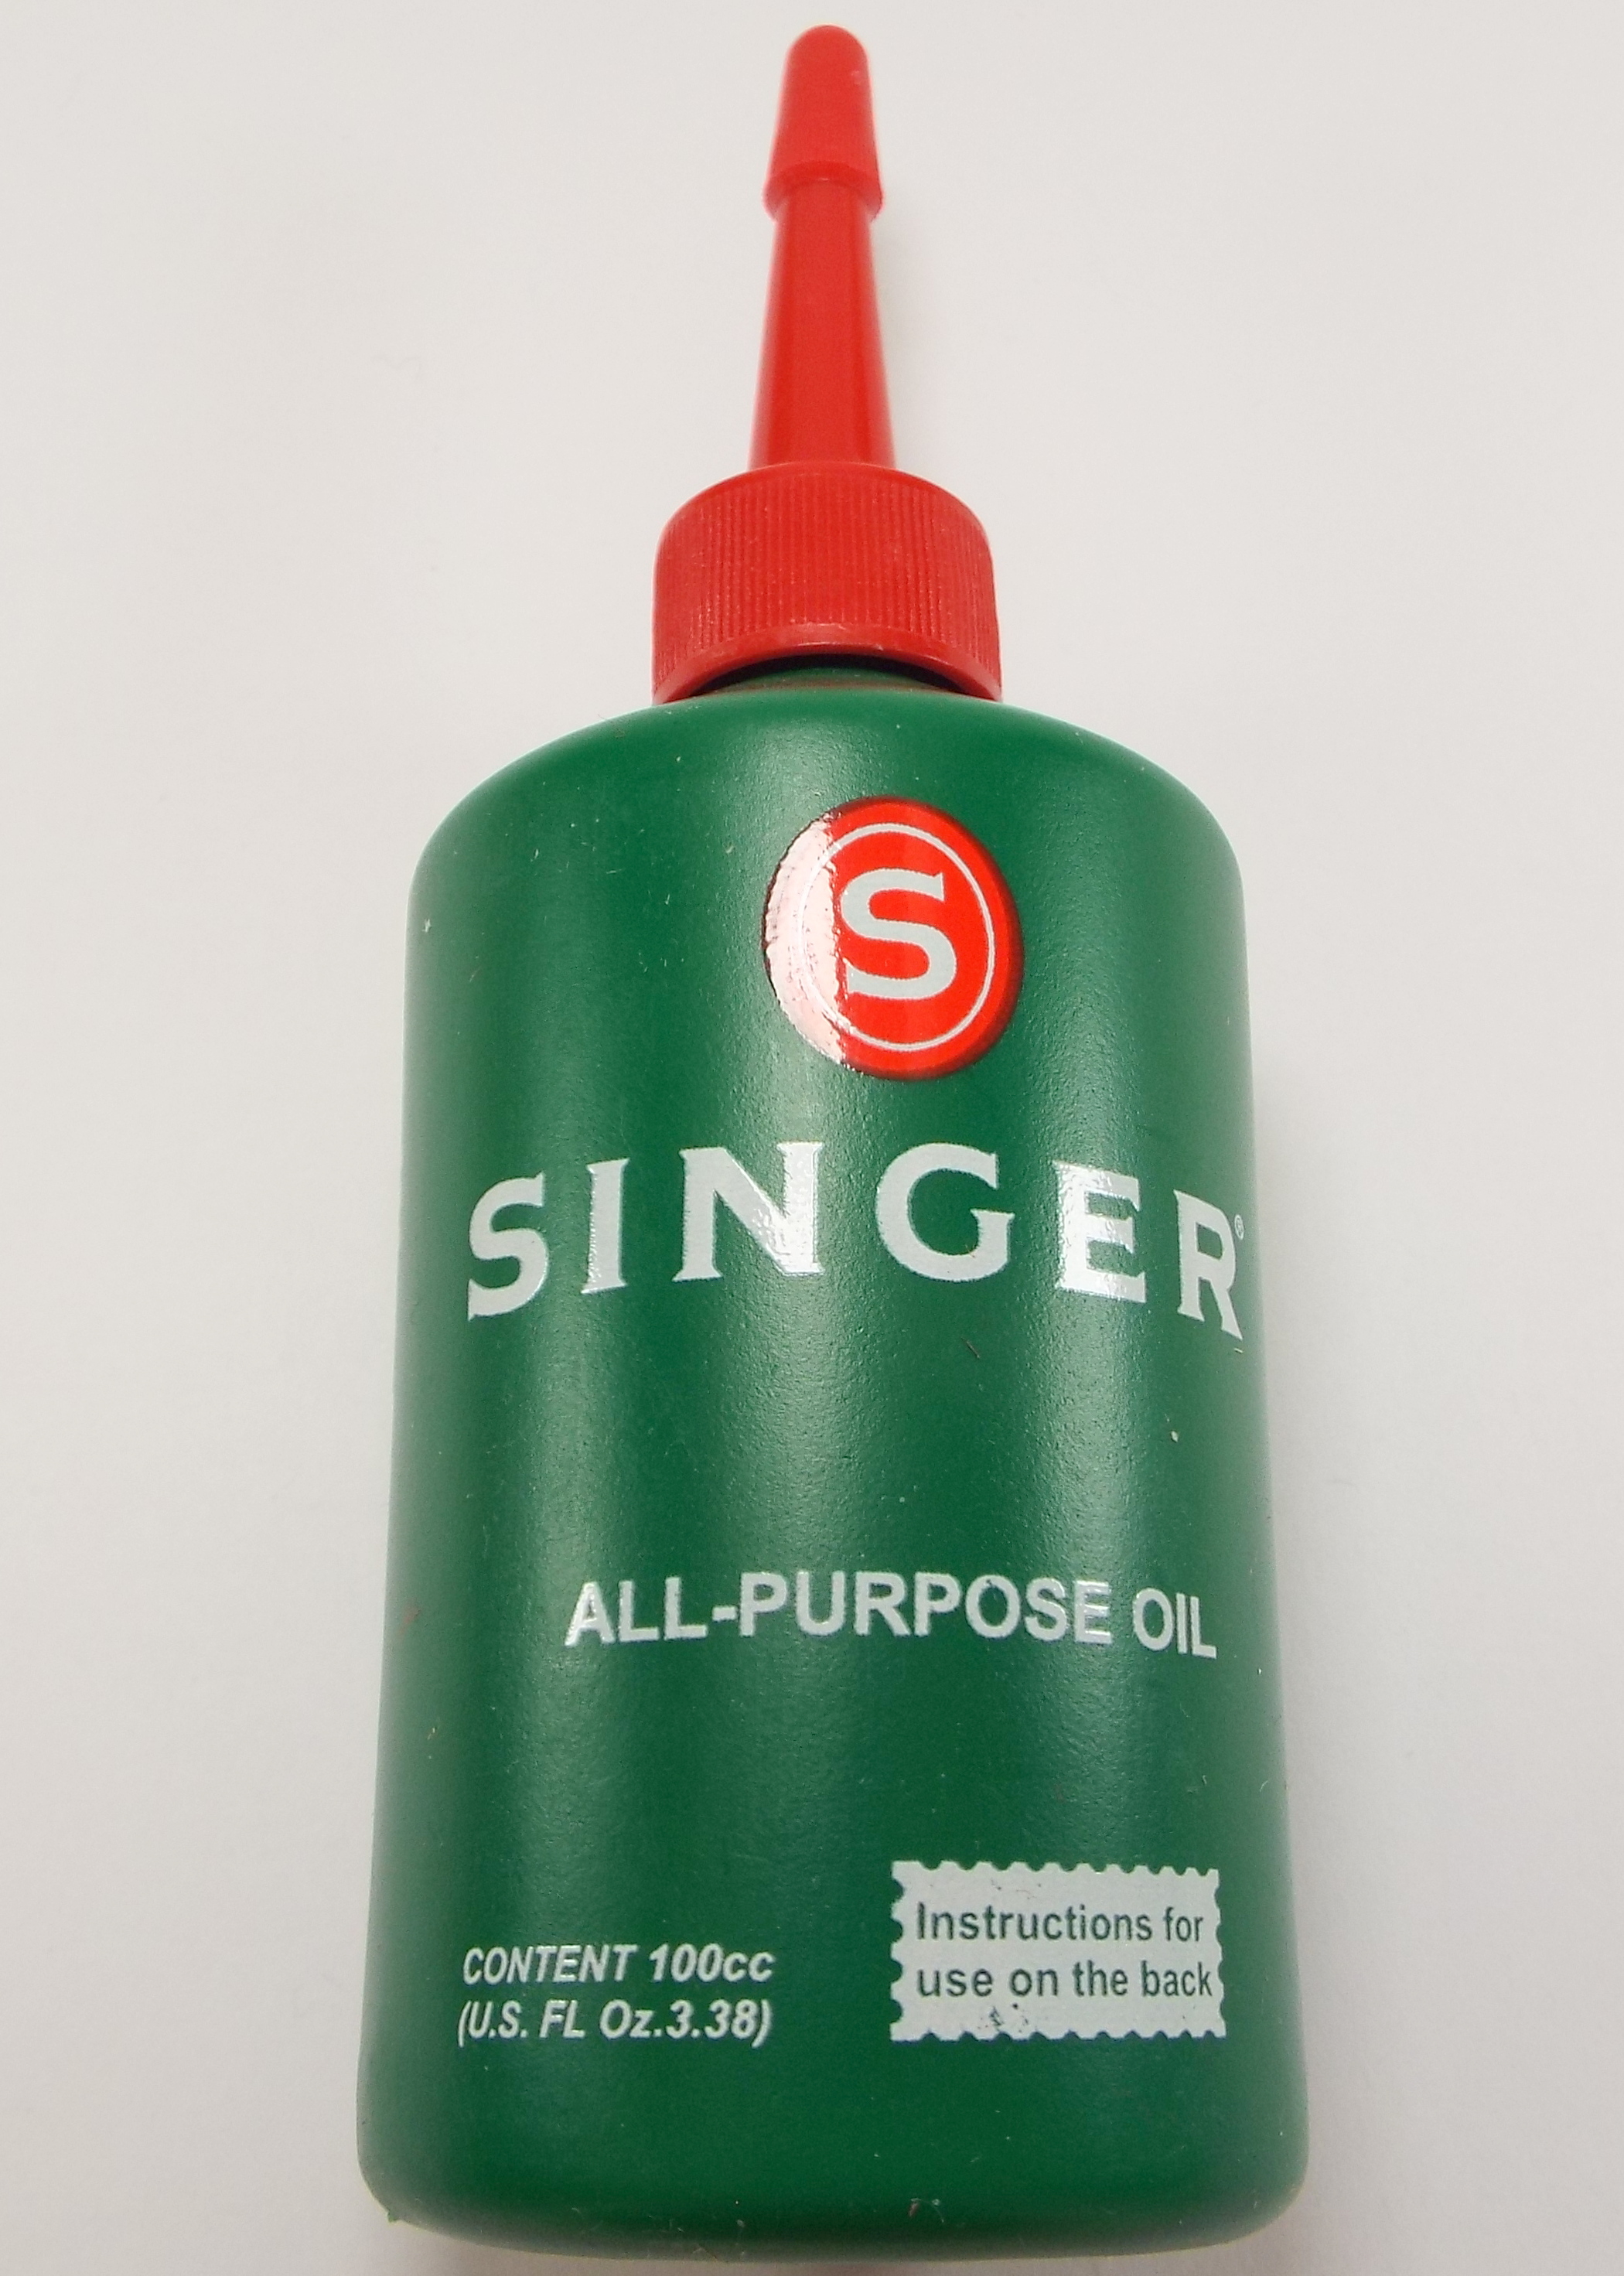 Singer All-Purpose Sewing Machine Oil